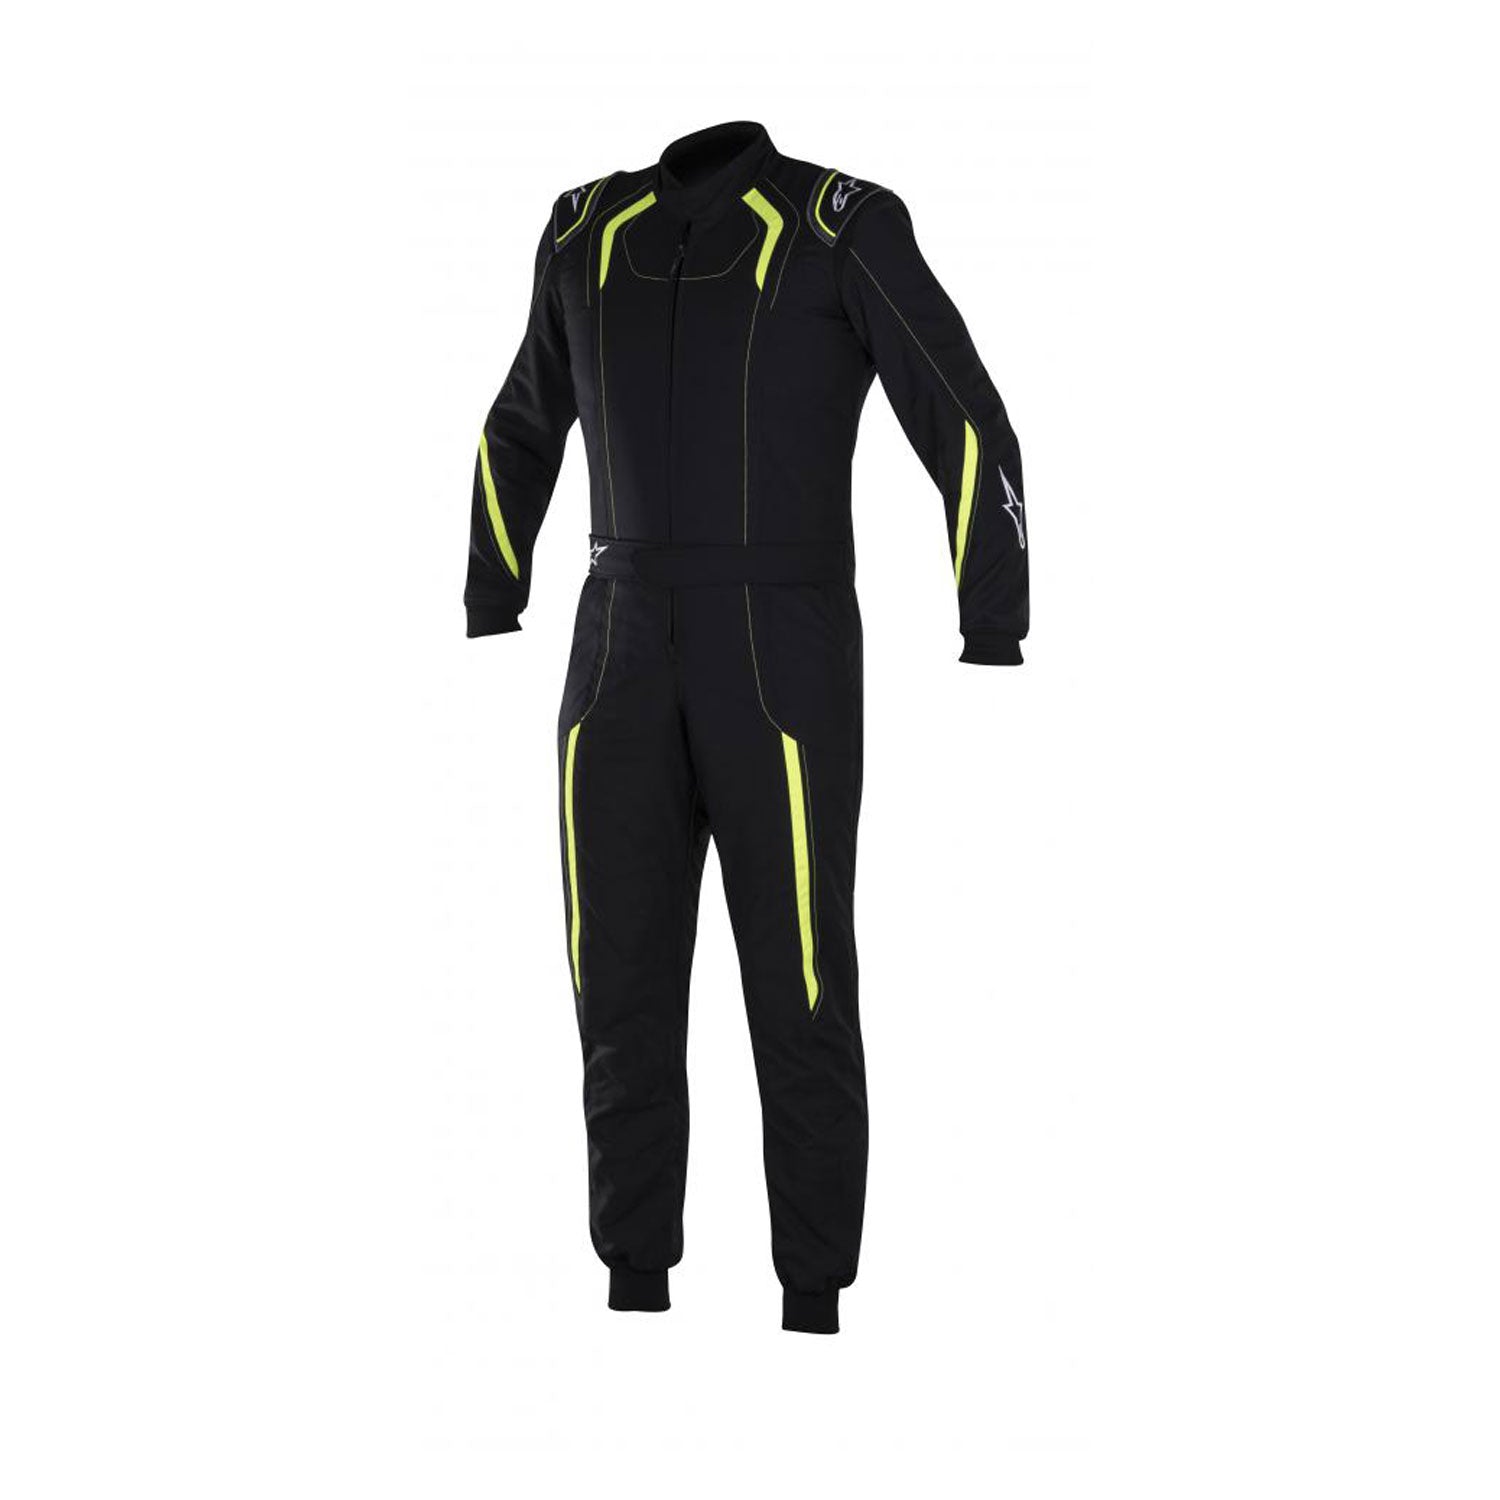 ALPINE STARS KARTING SUIT KMX-5 - Karting Race Suits Supplier Toronto by Paragon Competition